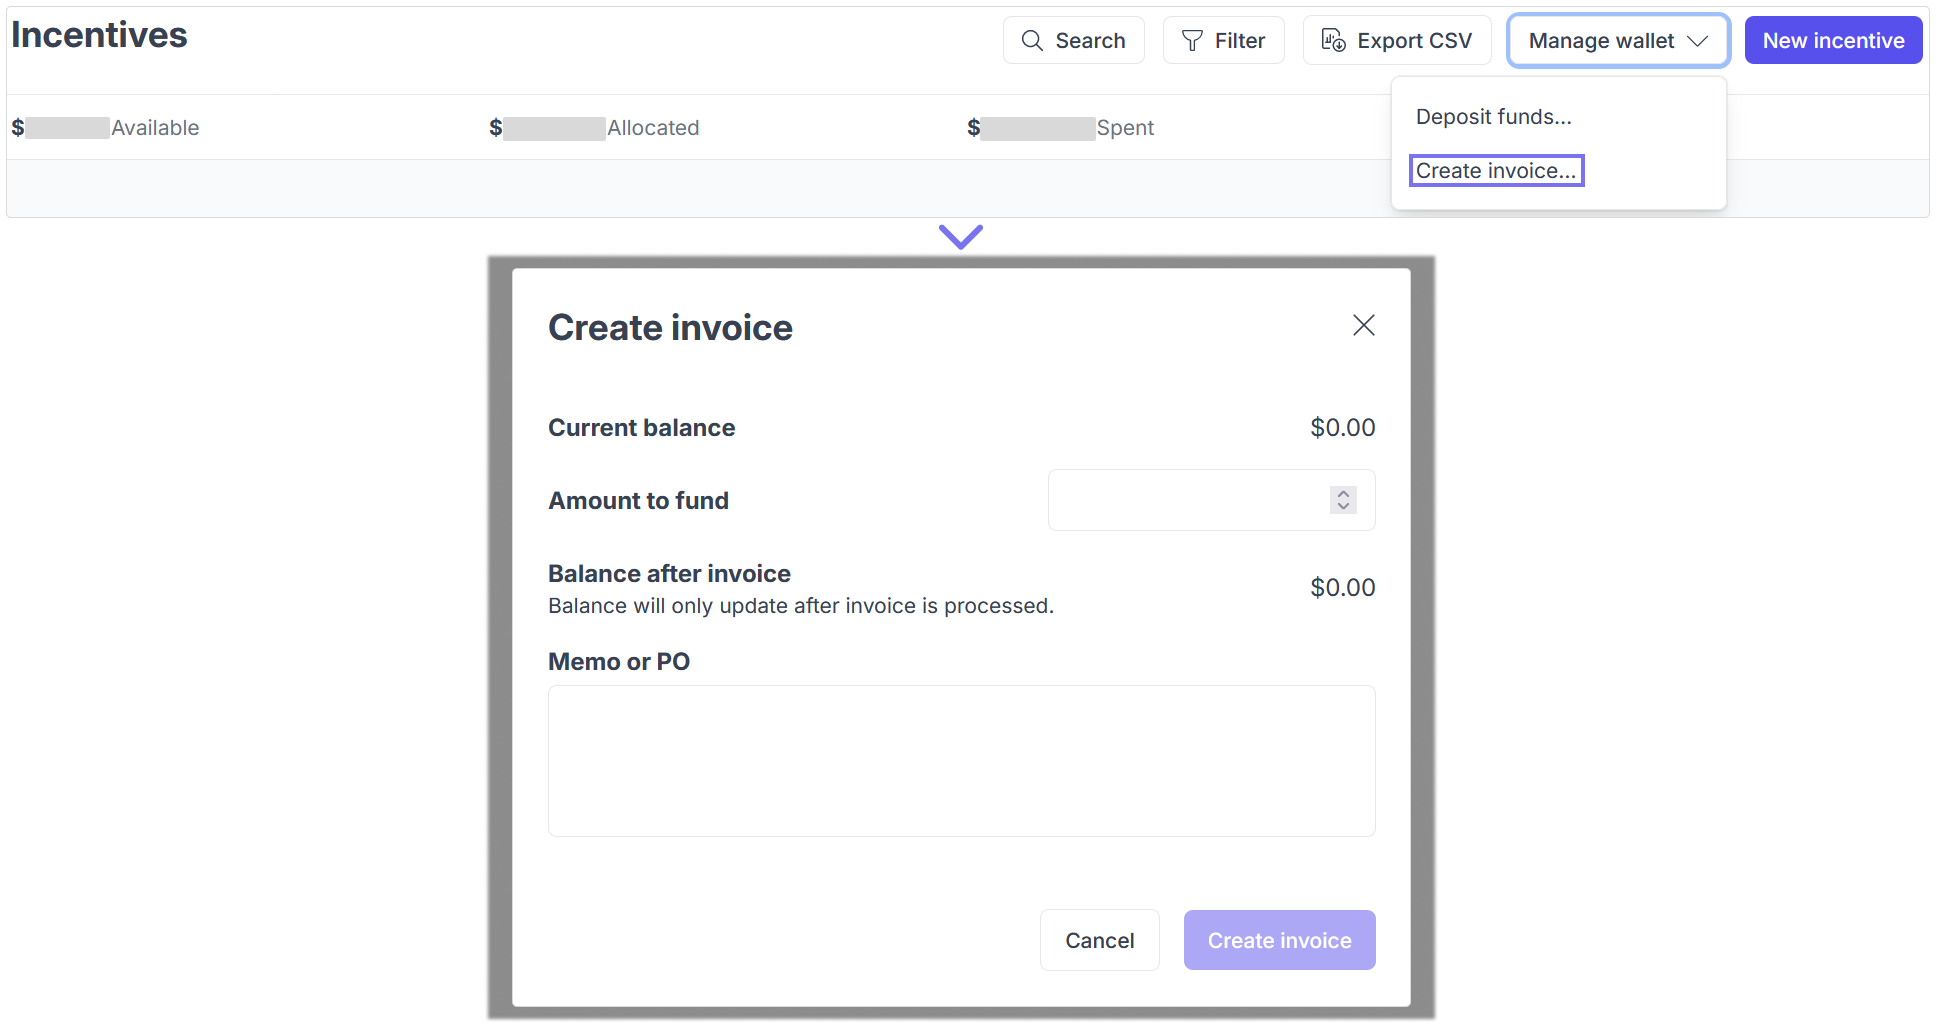 Create invoice from incentives page